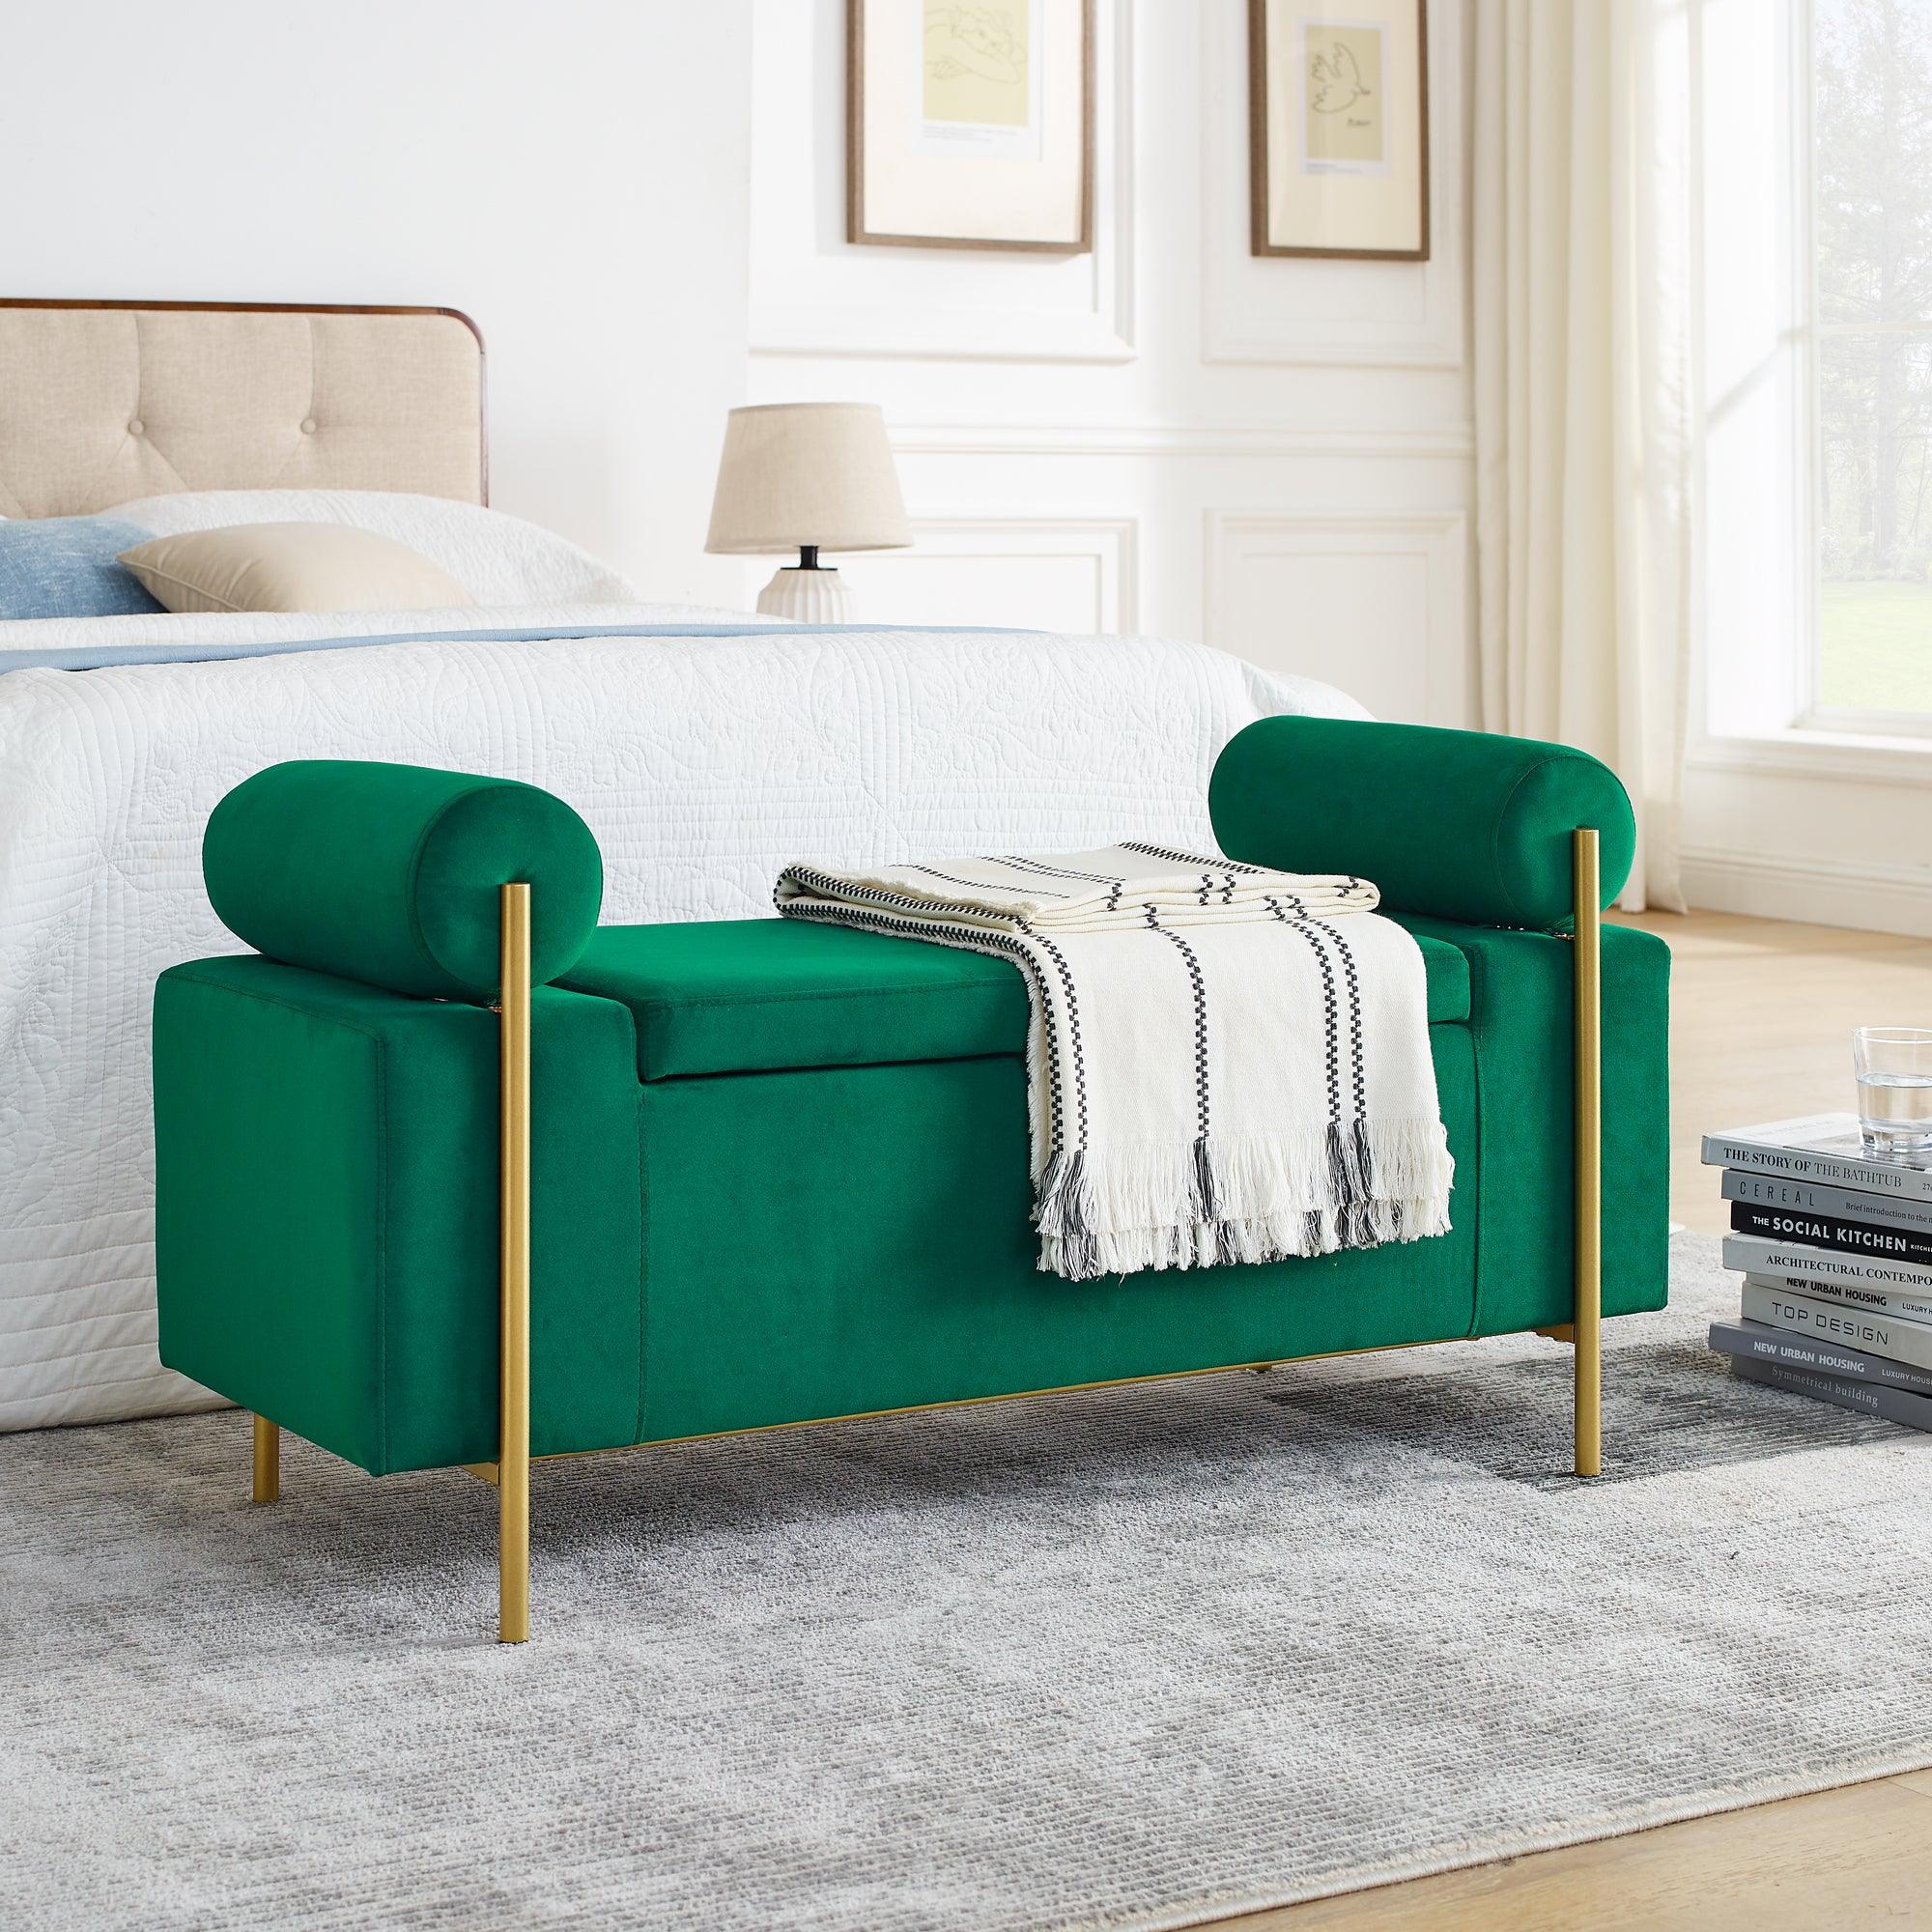 Elegant Upholstered Linen Storage Bench W/ Cylindrical Arms & Iron Legs For Hallway Living Room Bedroom - Green